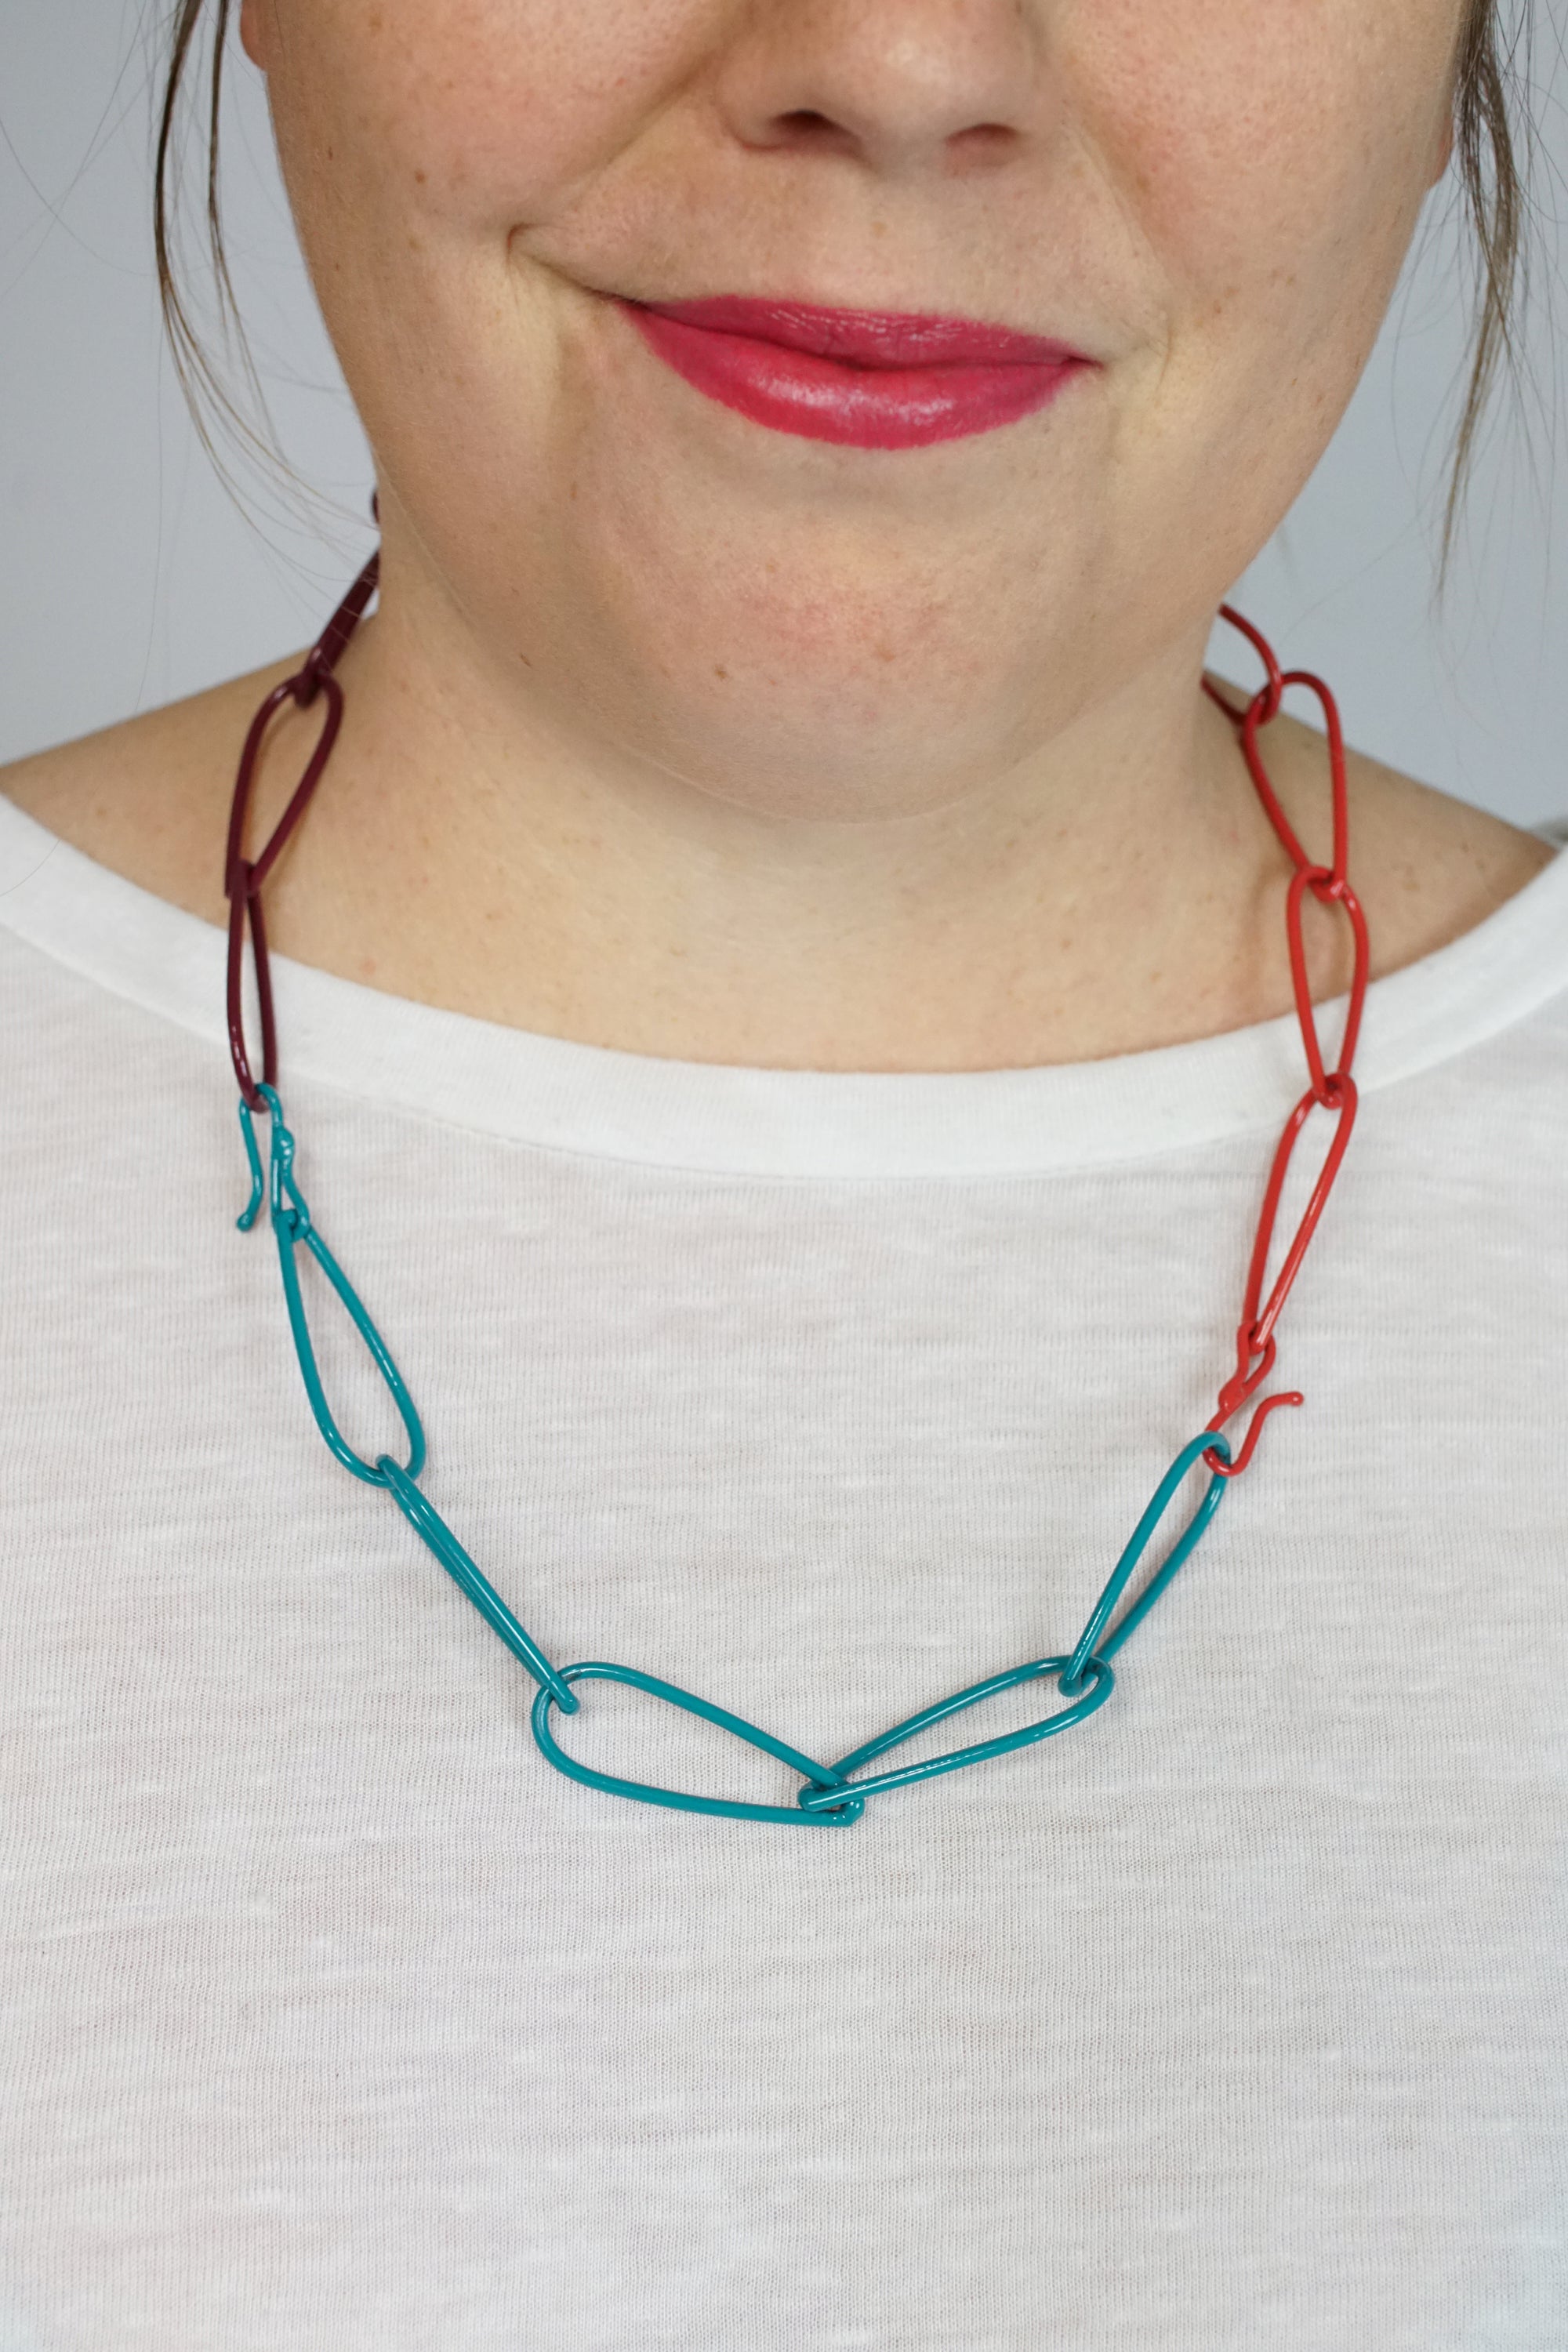 Modular Necklace in Coral Red, Lush Burgundy, and Bold Teal